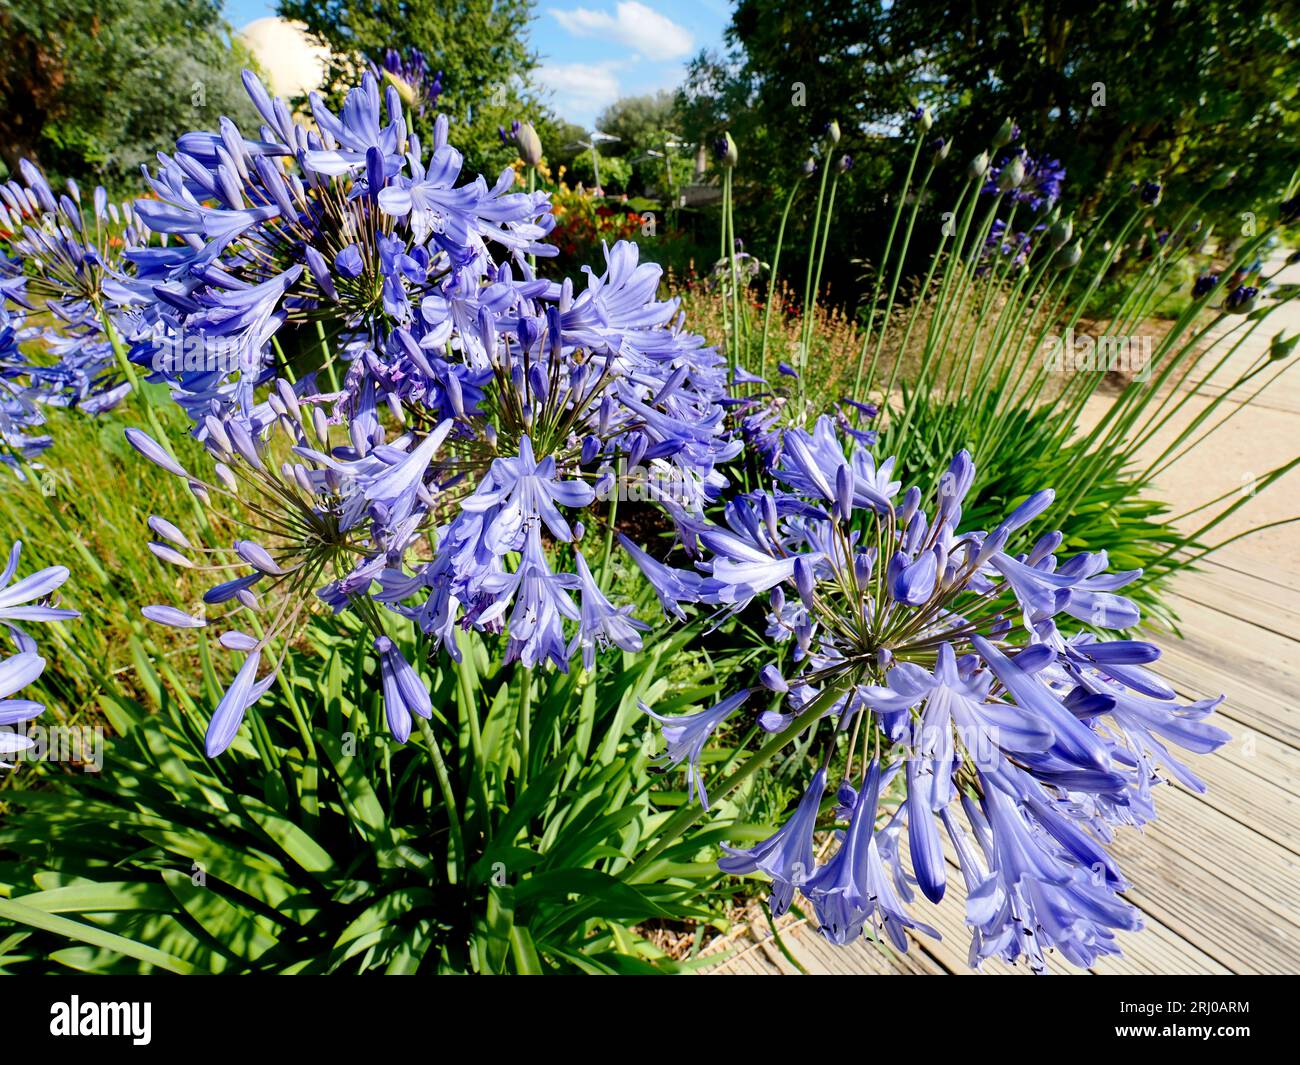 Flower bed of blue agapanthus flowers in french garden Stock Photo